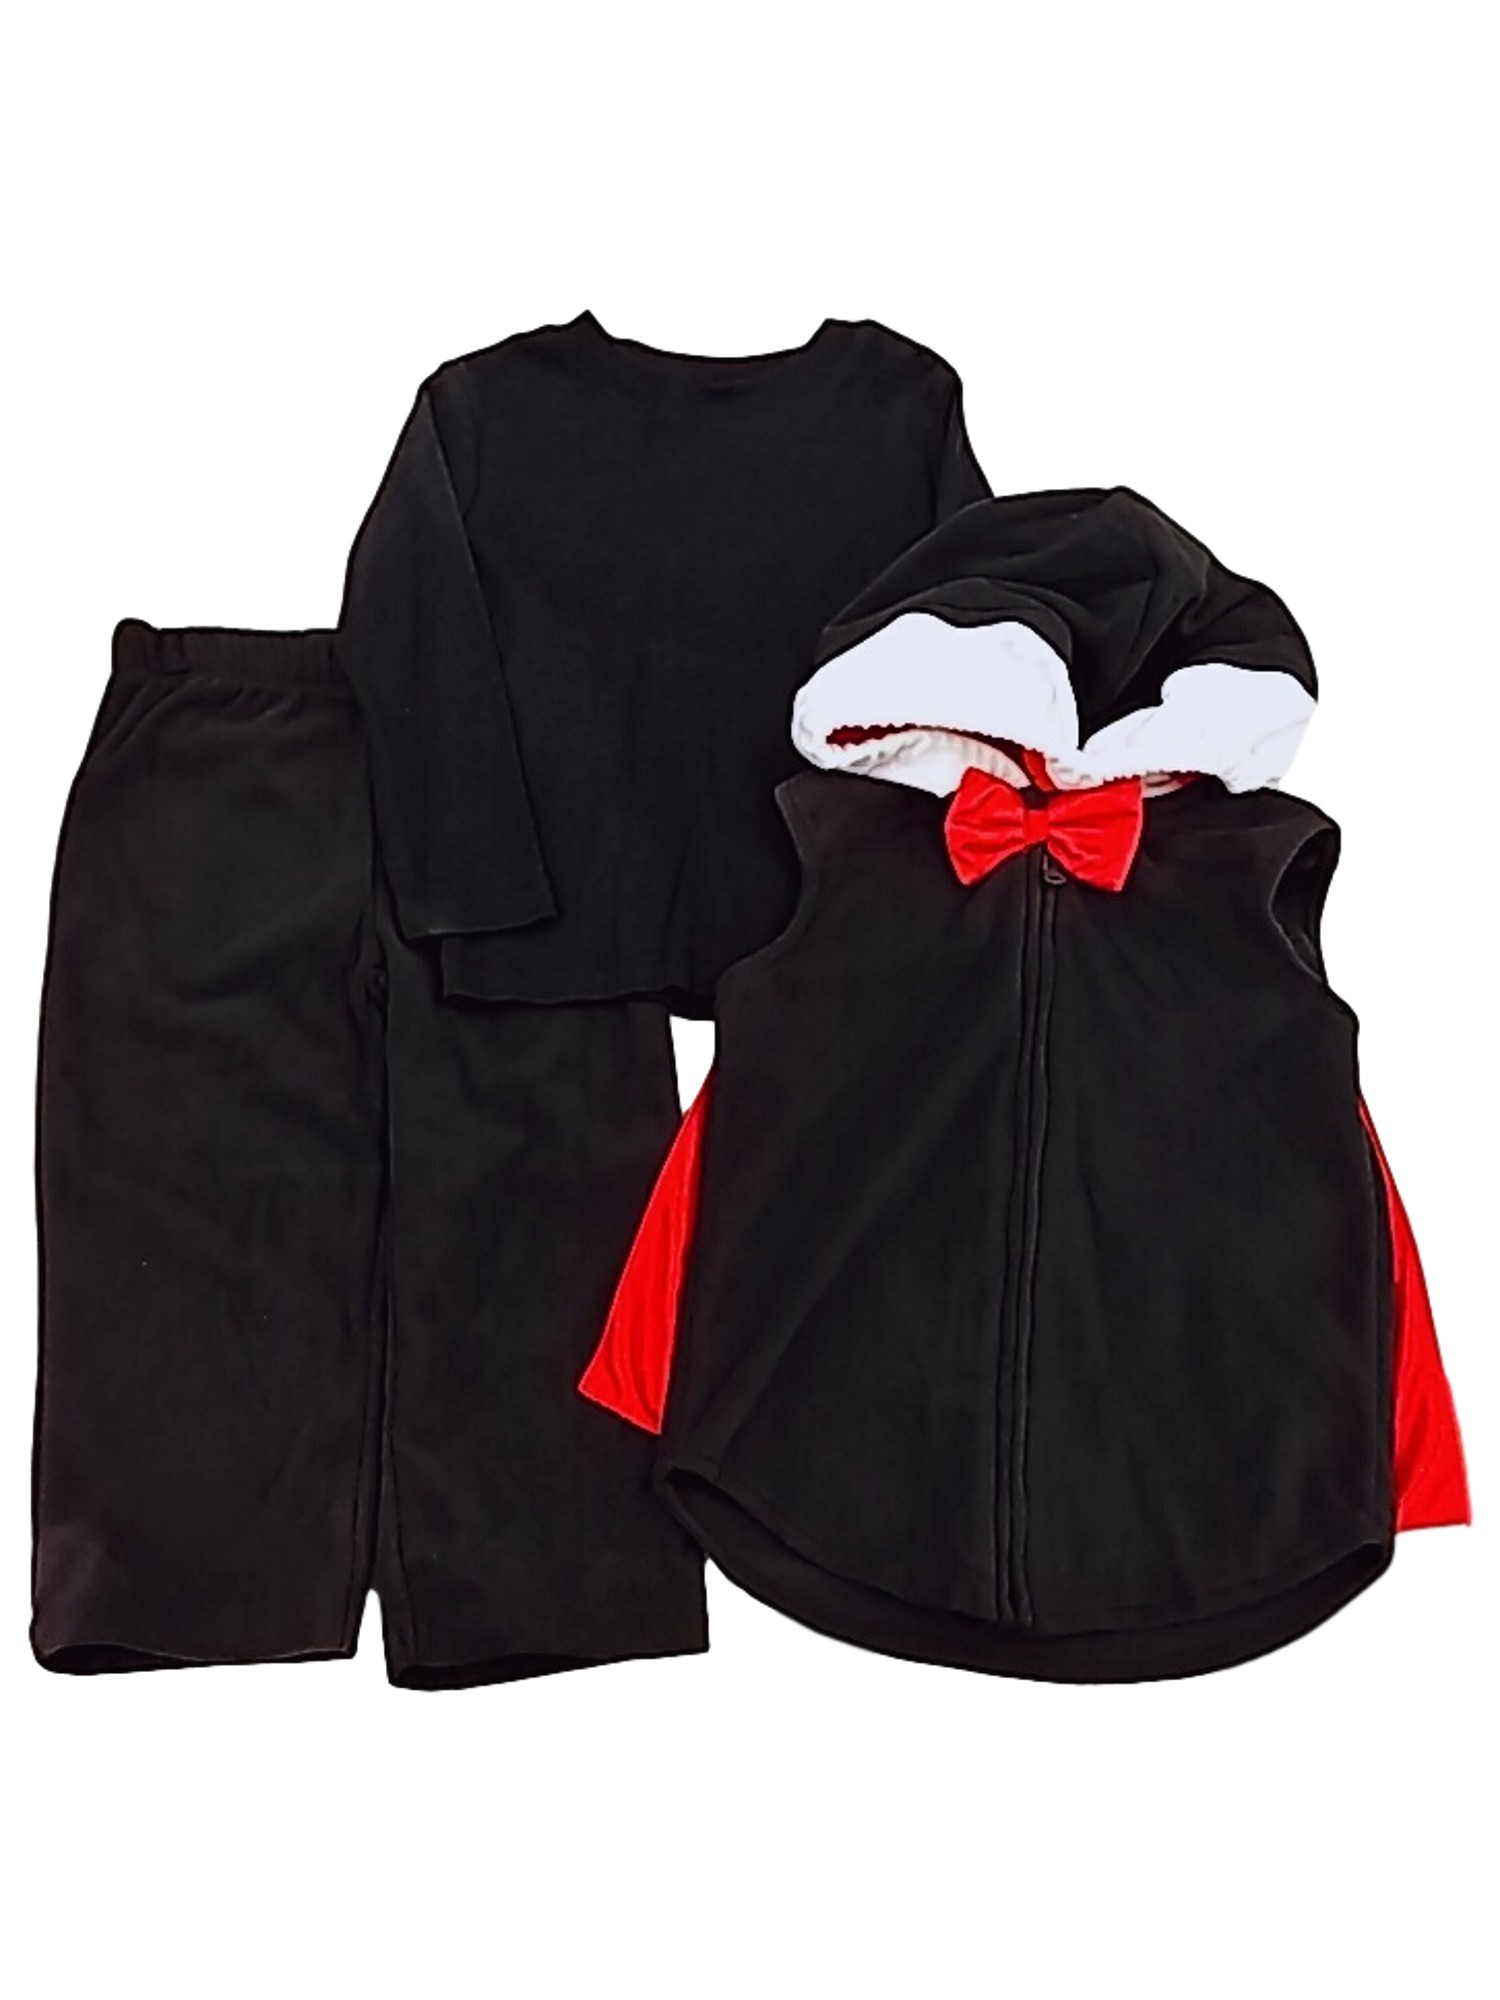 Carter's Carters Infant Boys Dracula Costume Vampire Halloween 3-Piece Outfit Set